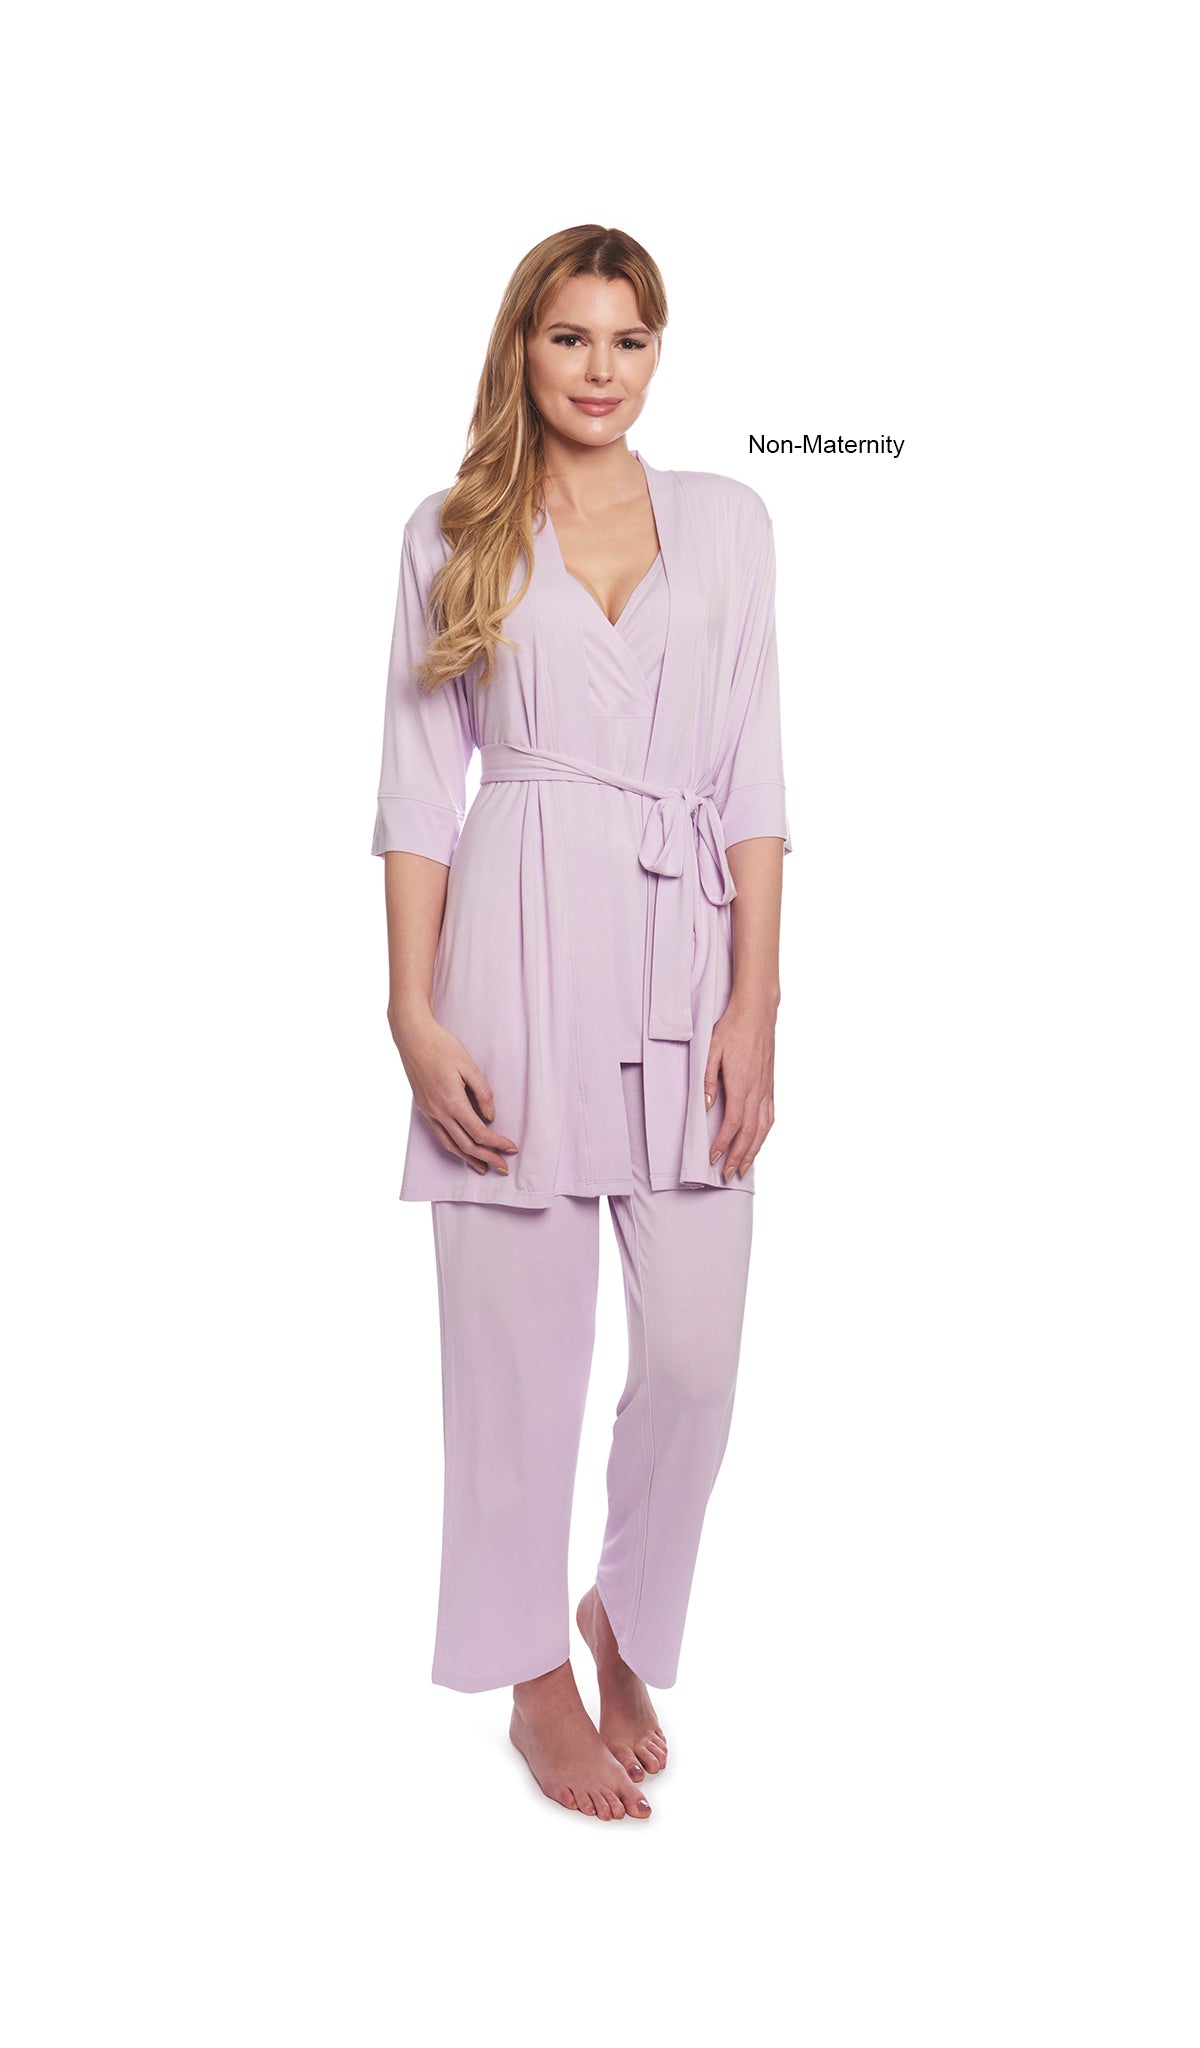 Lavender Analise 3-Piece Set. Woman wearing 3/4 sleeve robe, tank top and pant as non-maternity.